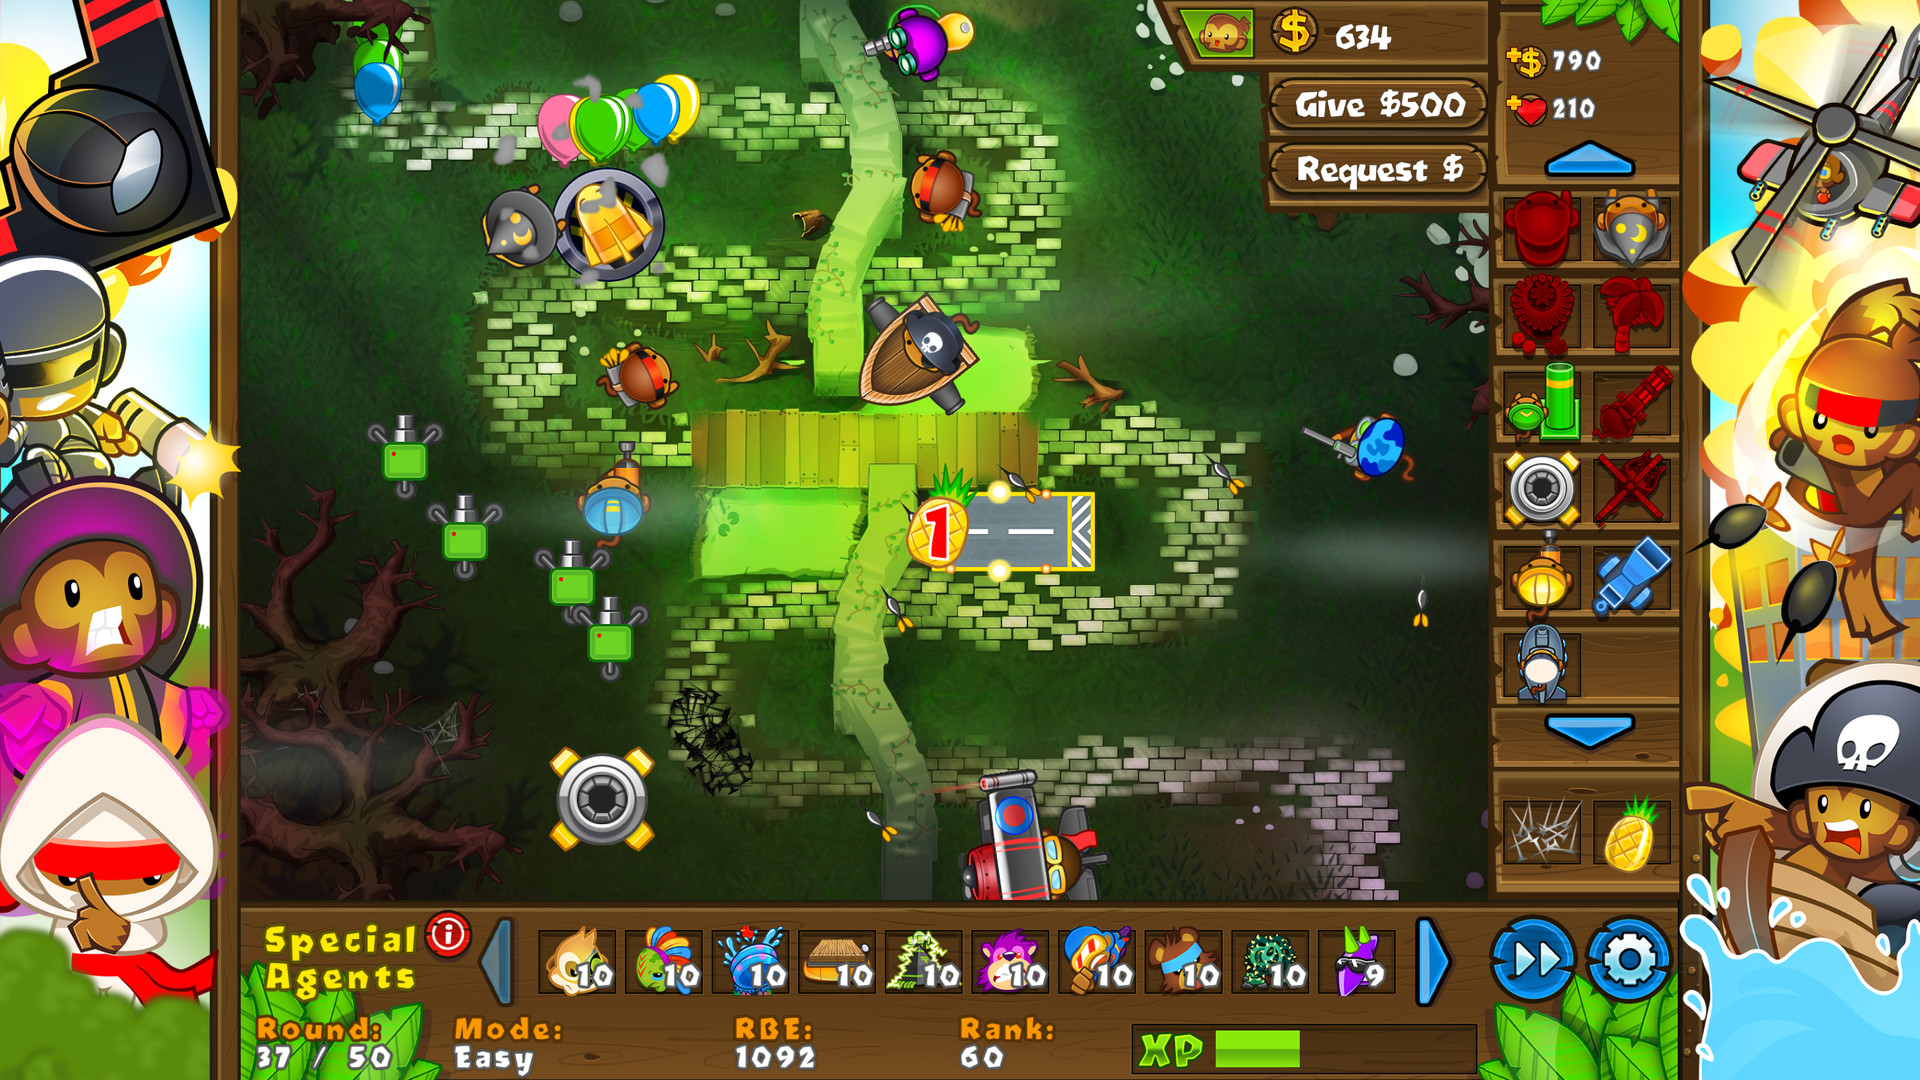 bloons tower defense 5 free no download